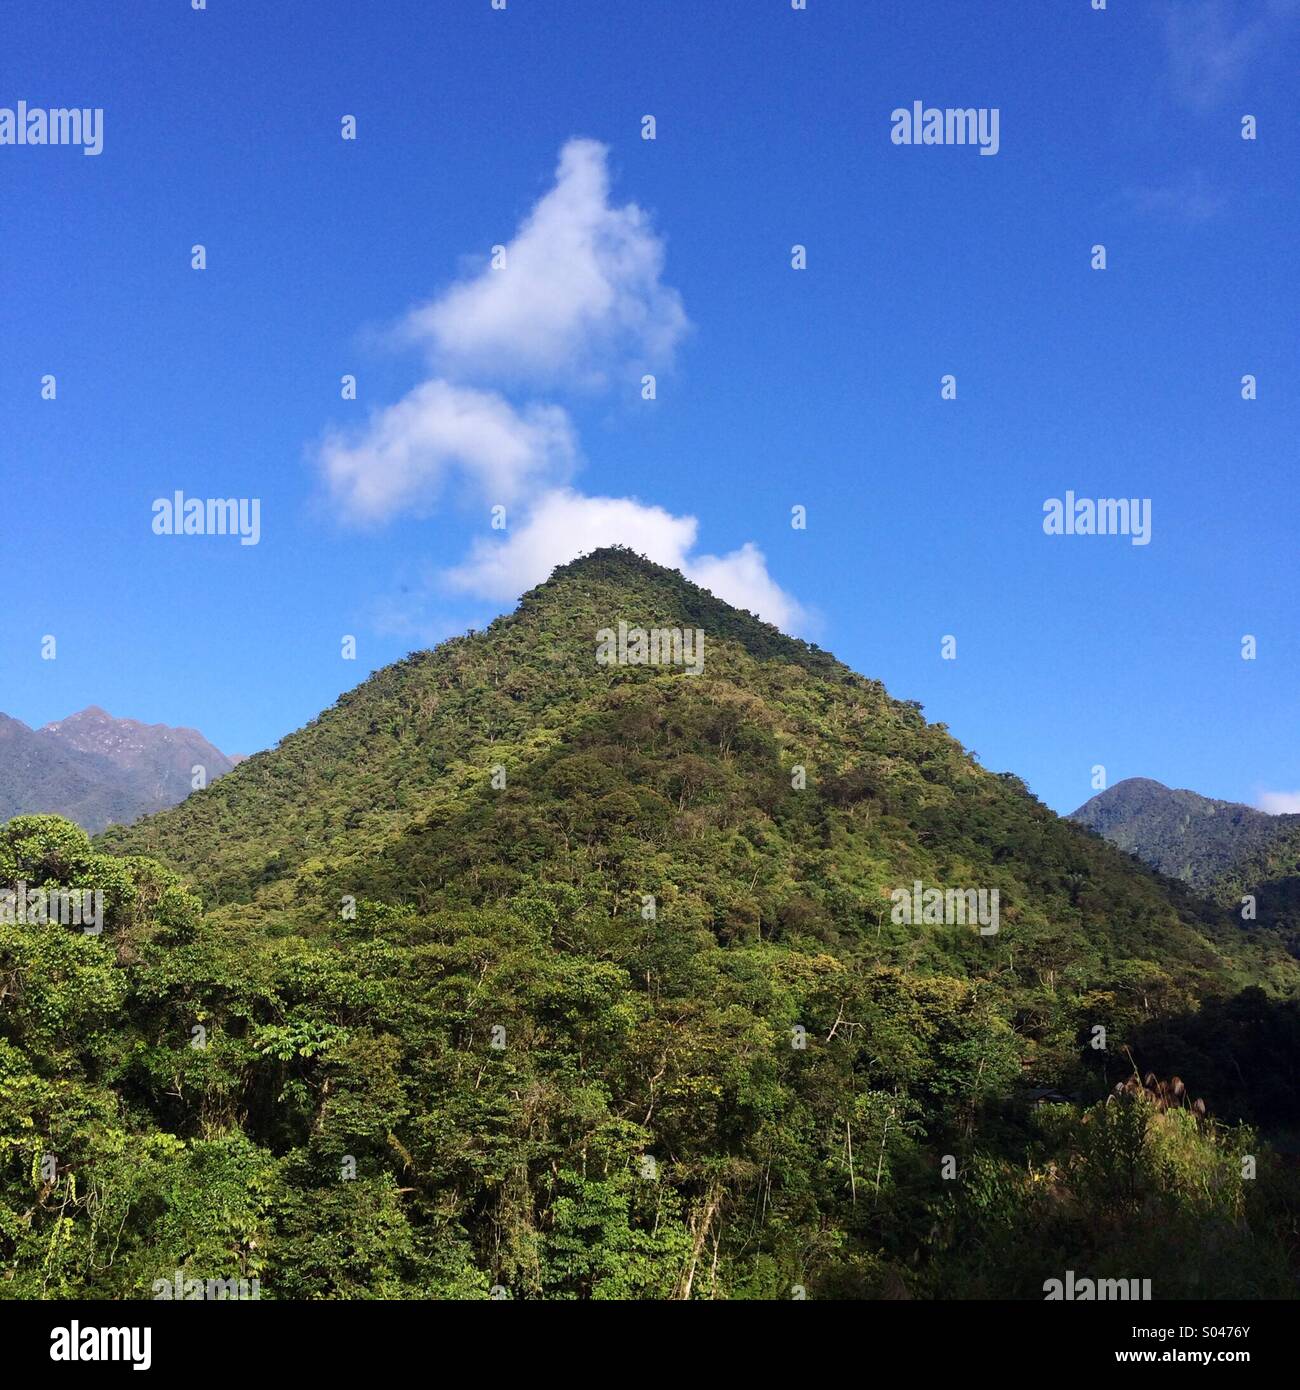 Clouds, Andes mountains, cloud forest, Cosnipata Valley, Manu National Park, Peru Stock Photo